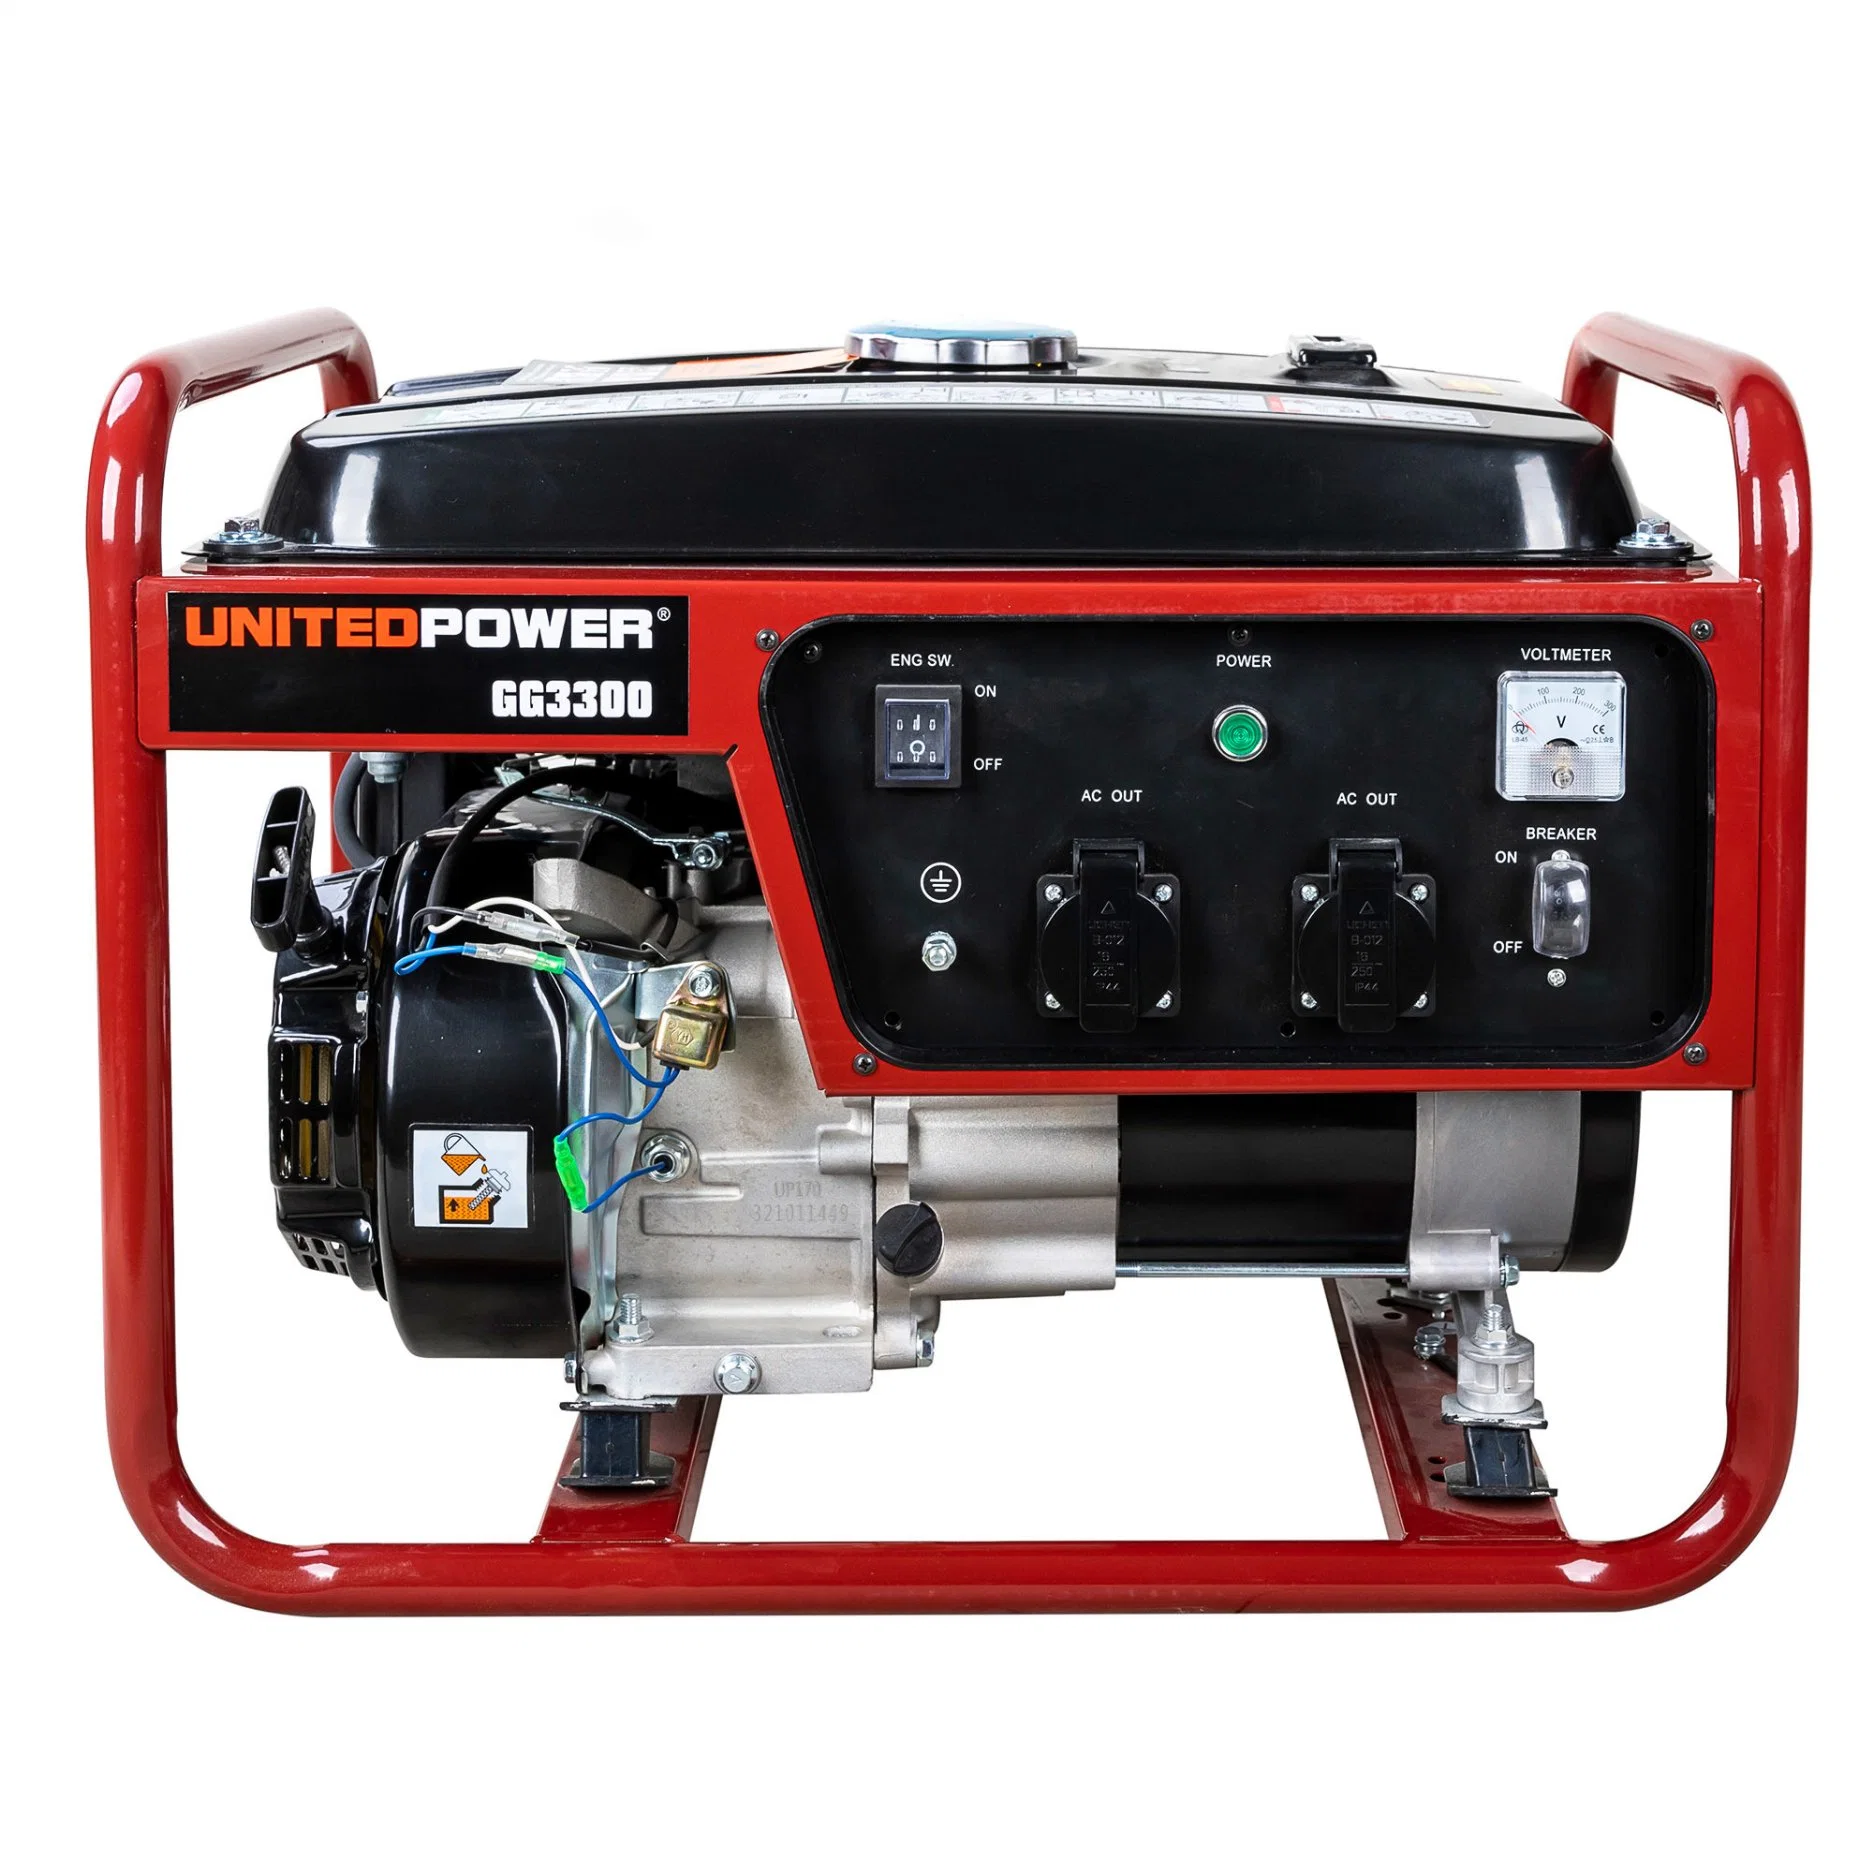 1kw Silent Power Portable Home Industrial Gasoline Petrol Generator for Sale